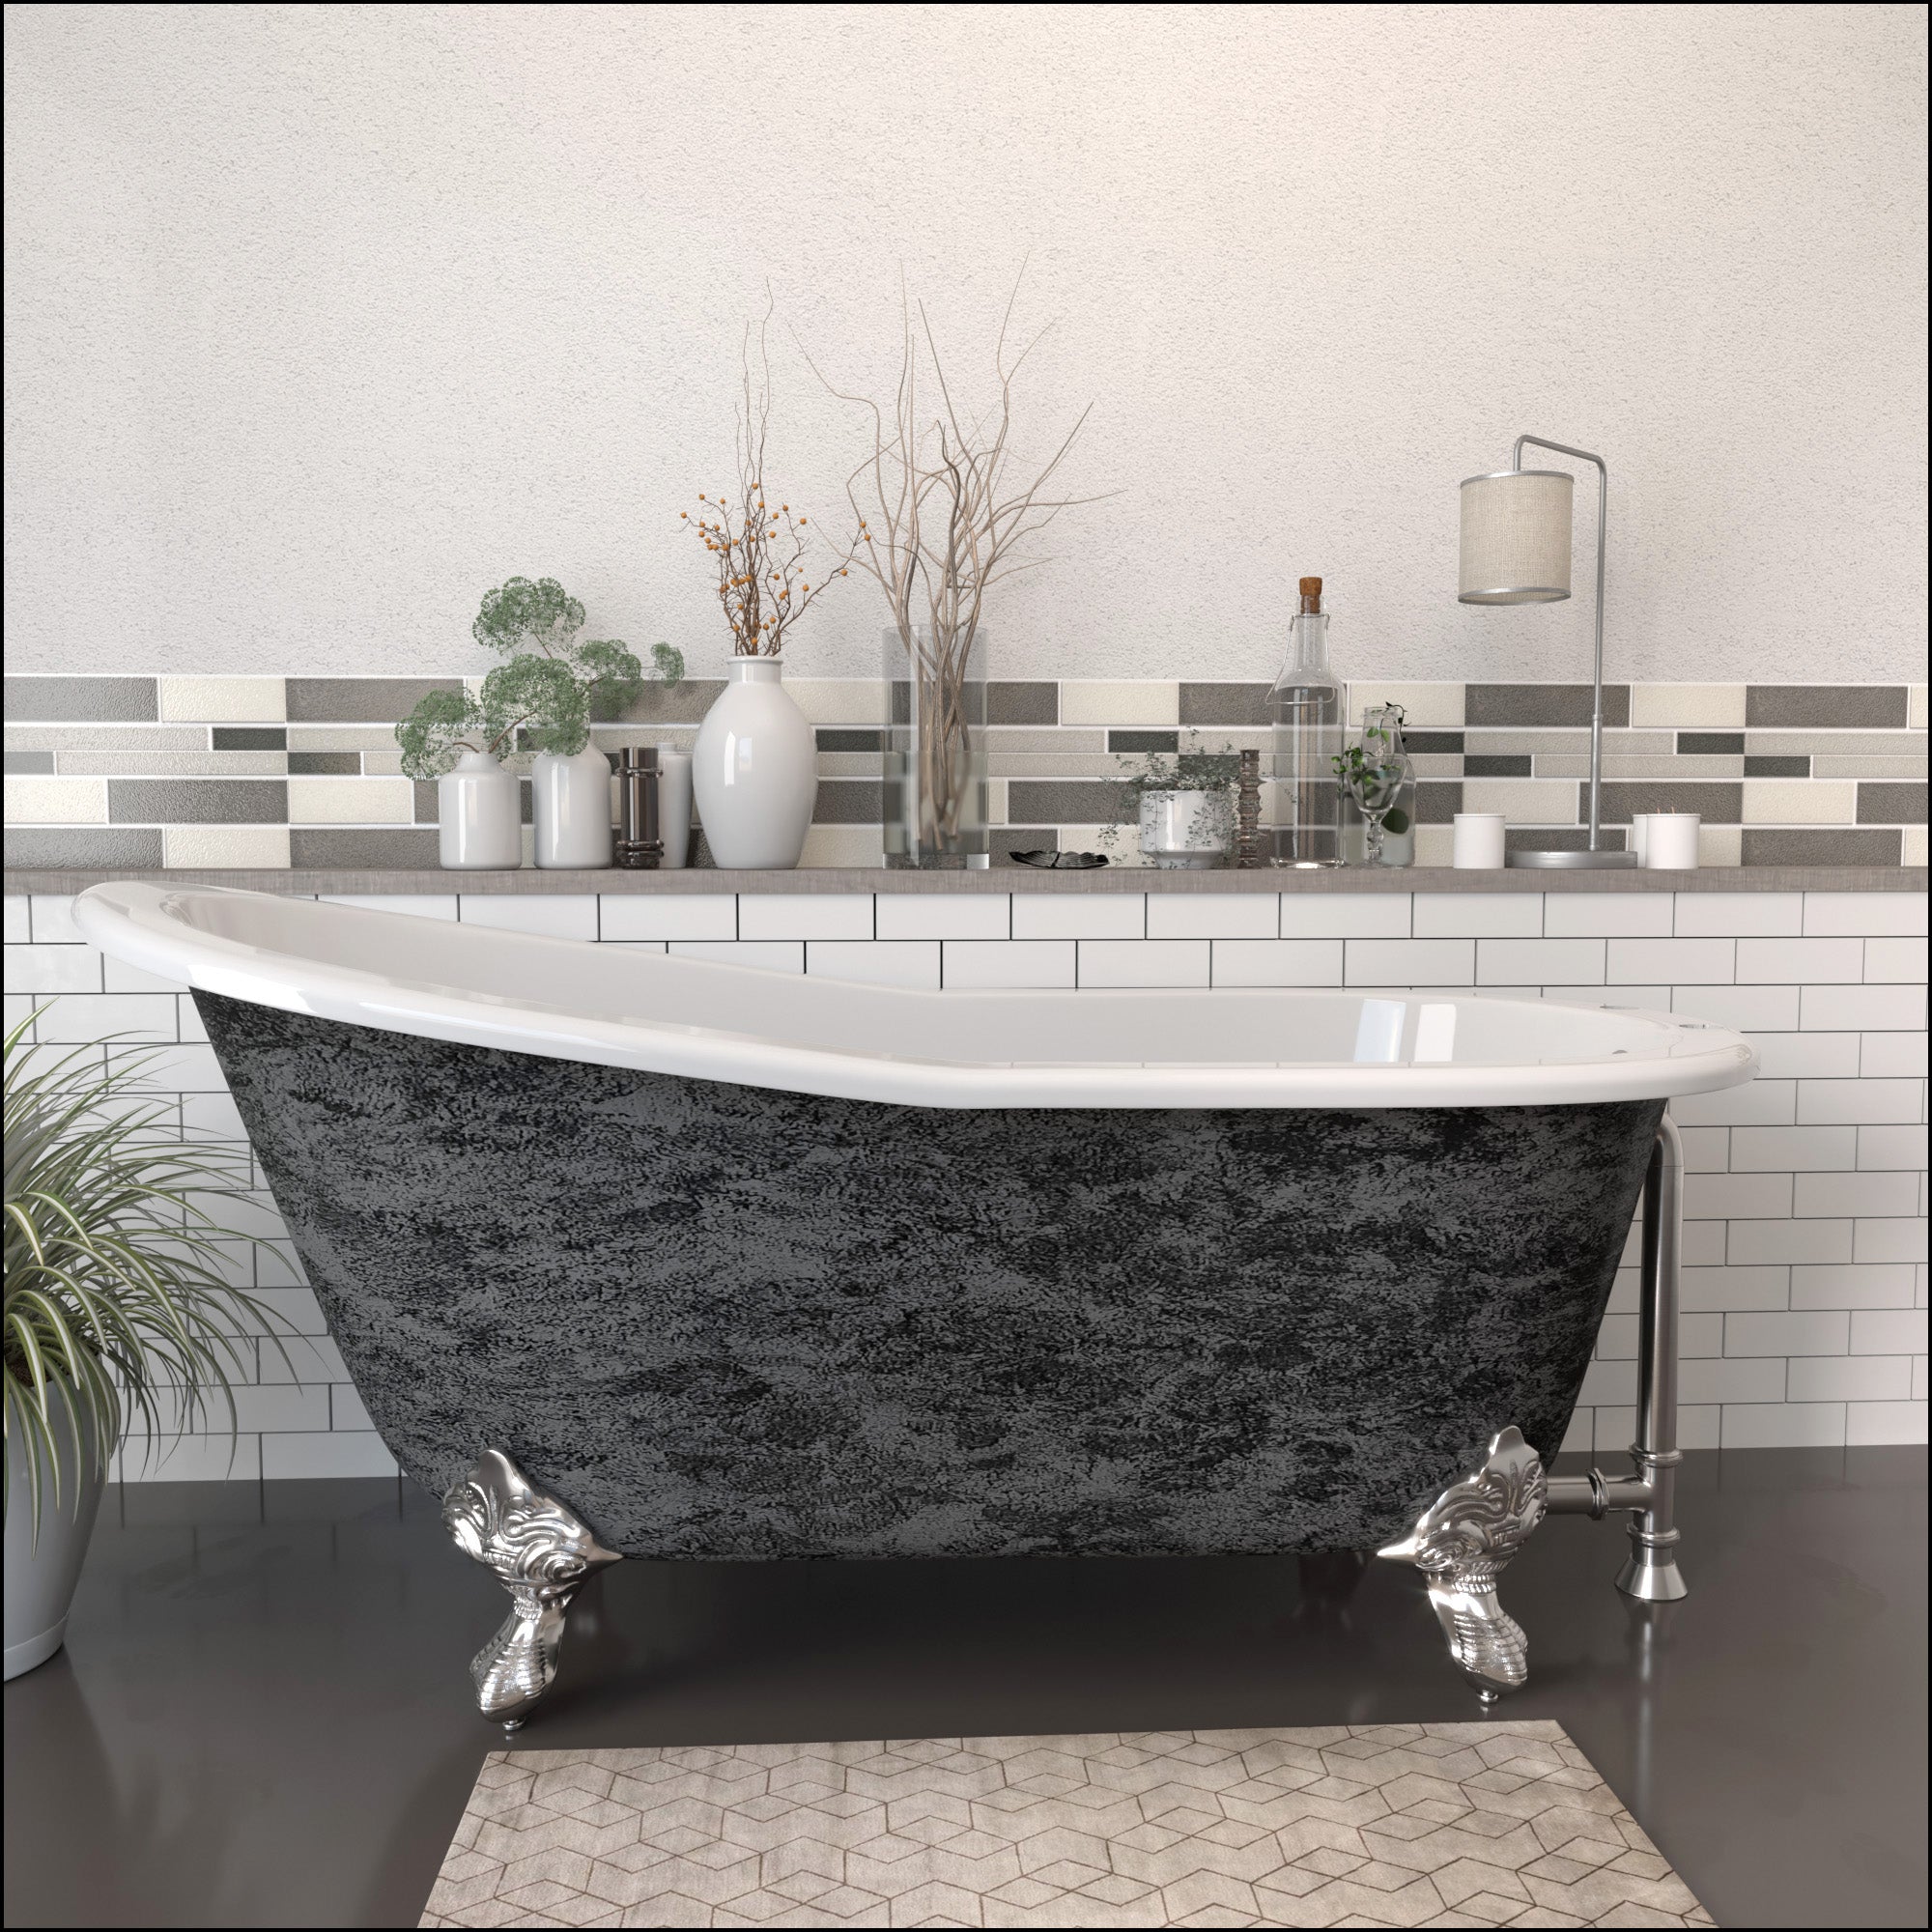 Cambridge Plumbing 67” x 30” Slipper Scorched Platinum Cast Iron Bathtub (Hand Painted Faux Scorched Platinum Exterior) with” 7” Deck Mount Faucet Holes and Claw Feet (Brushed Nickel) ST67-DH-SP - Vital Hydrotherapy